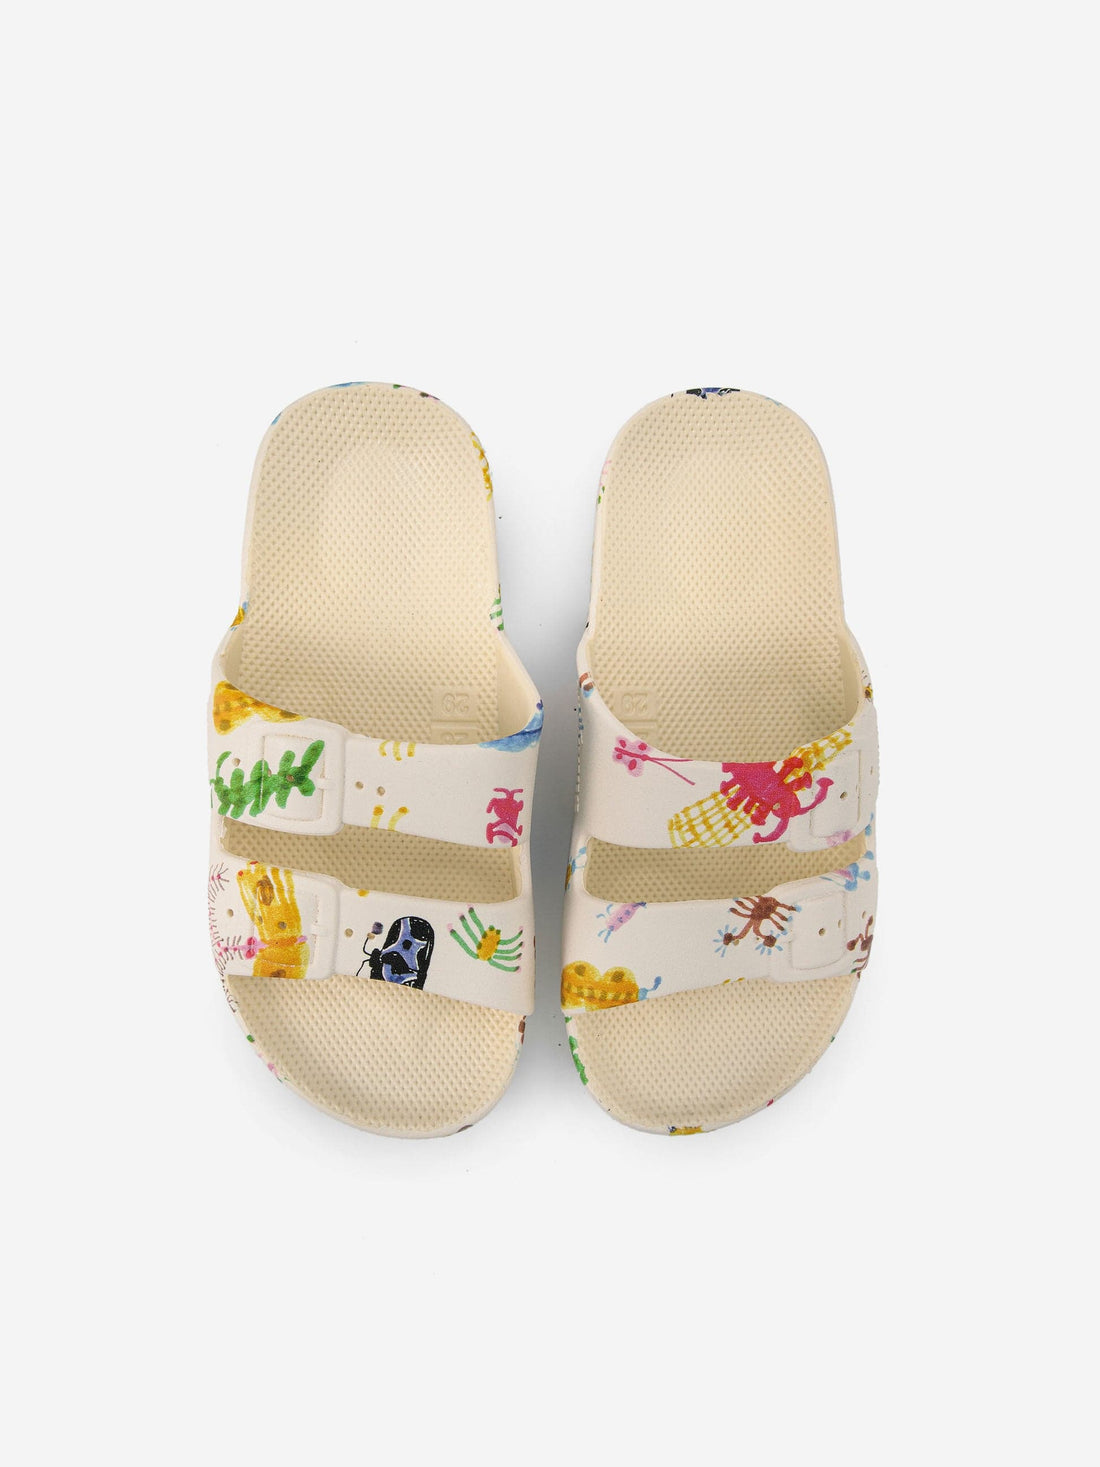 Funny Insects Freedom Moses x Bobo Choses sandals - Parkette.